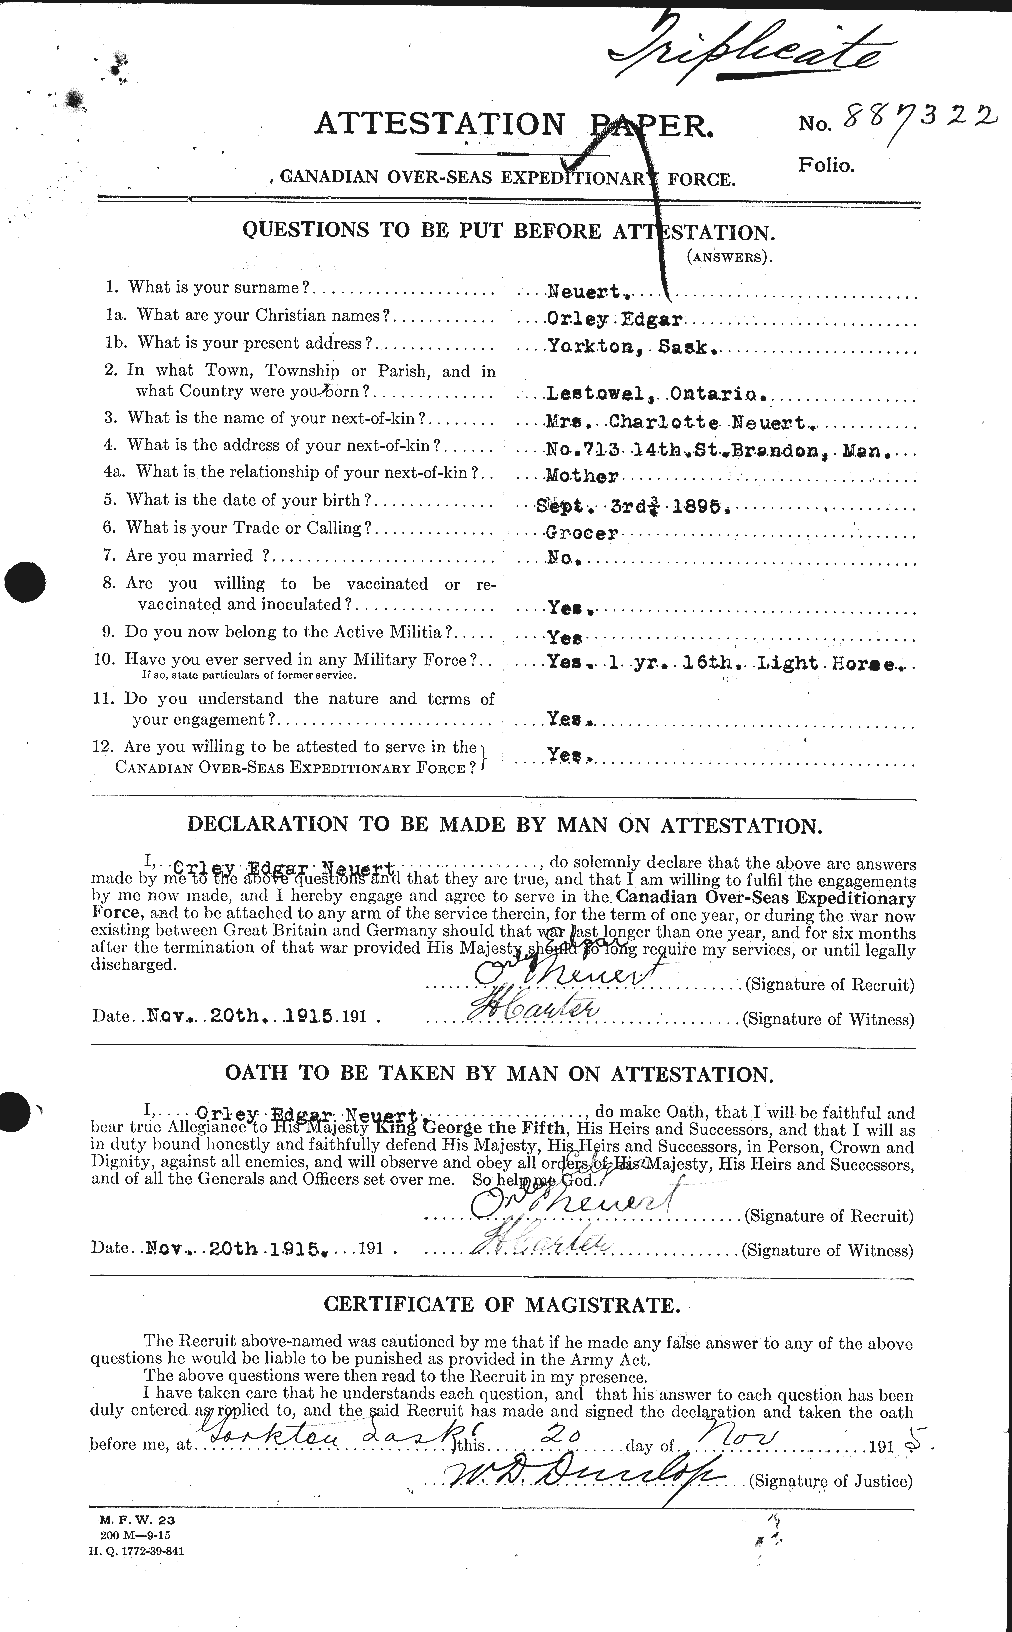 Personnel Records of the First World War - CEF 548740a